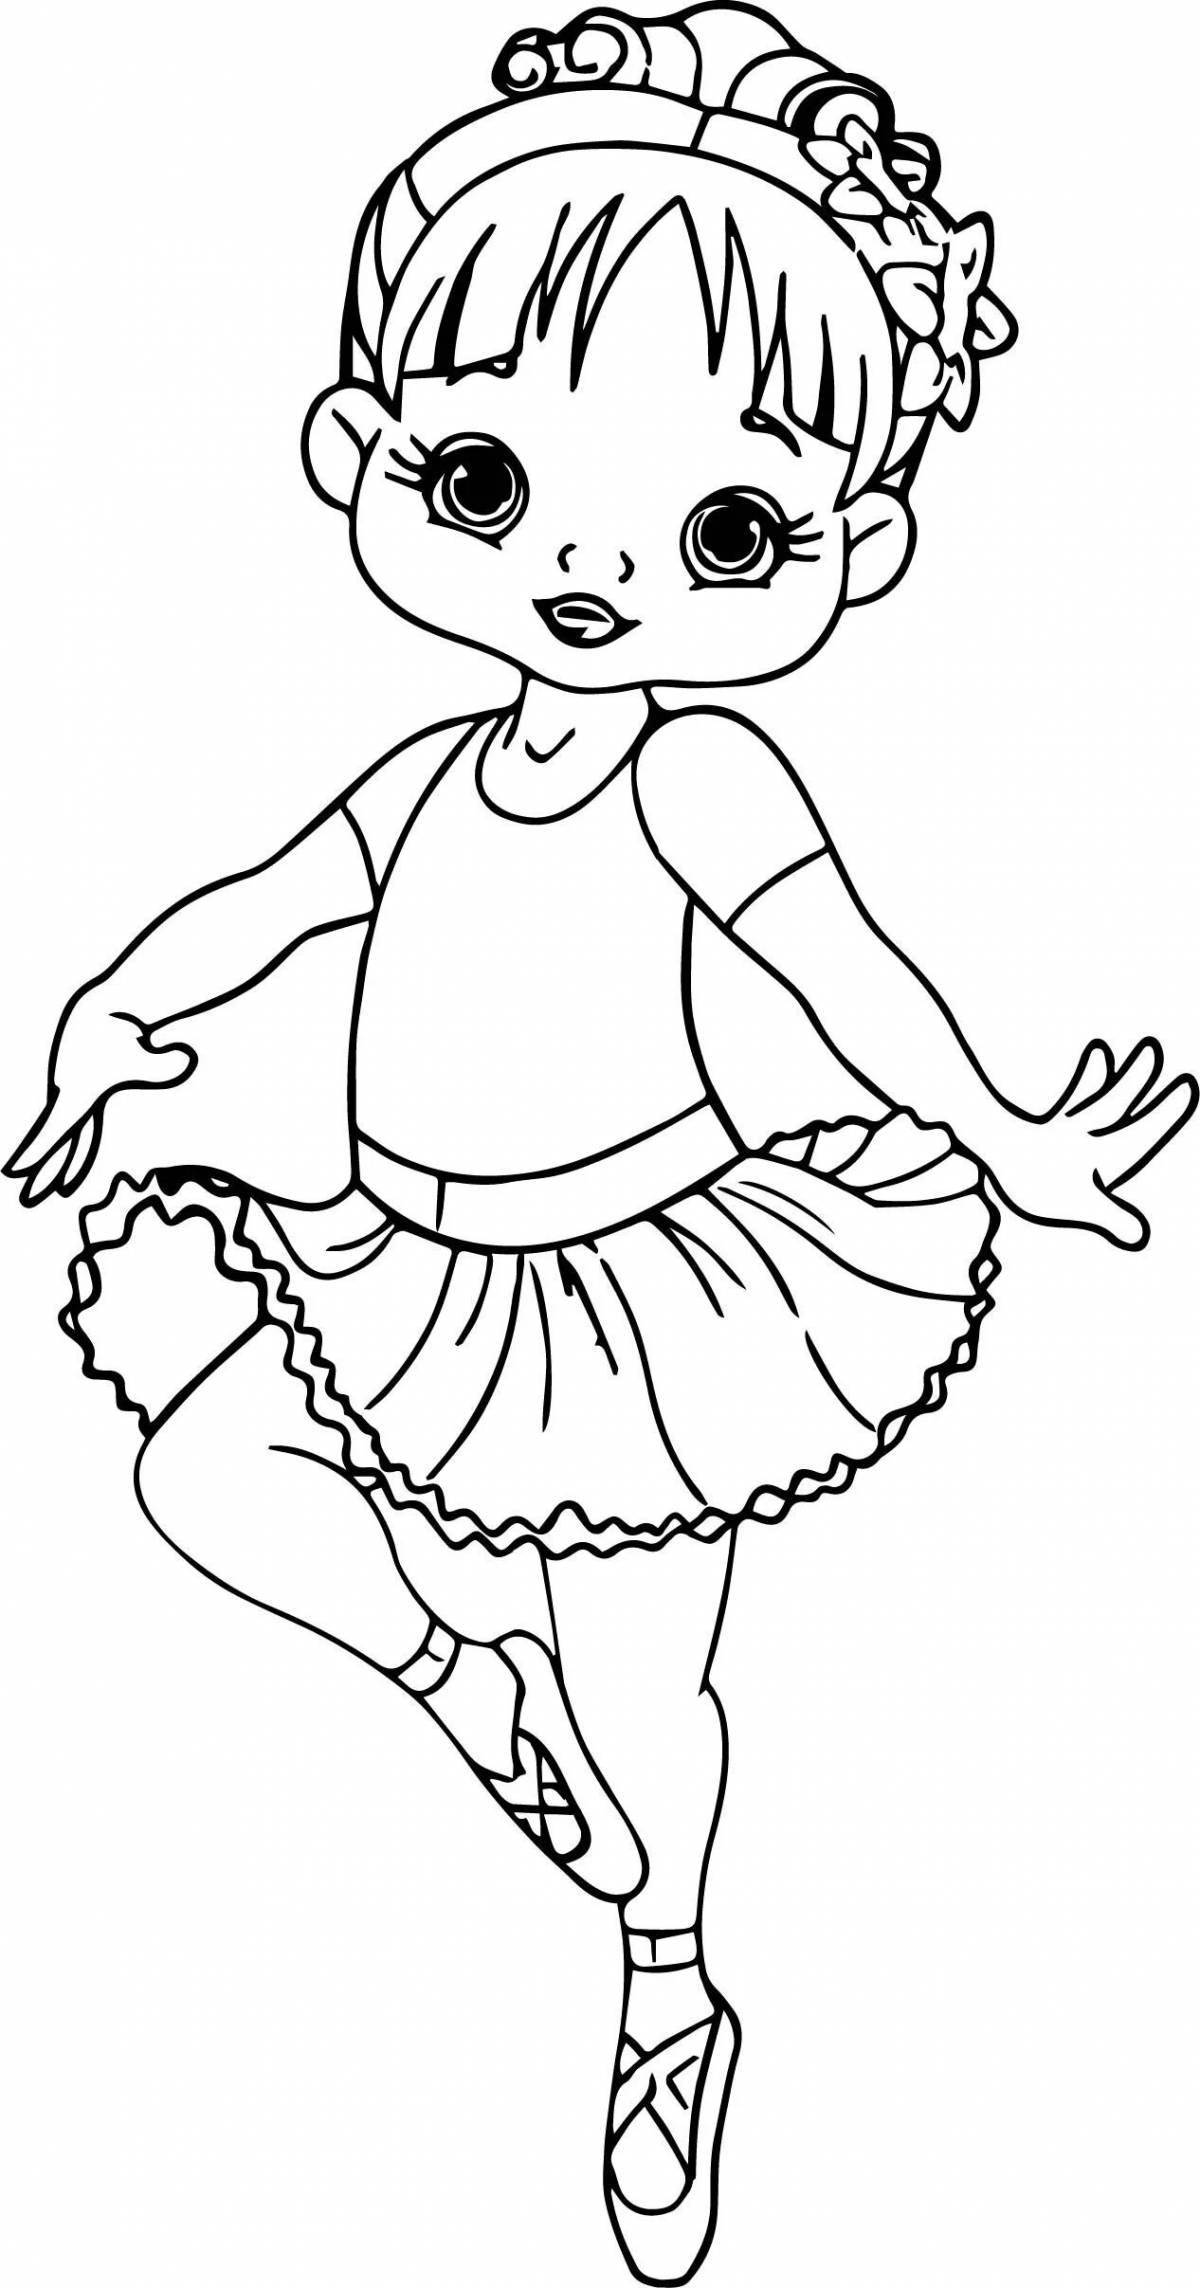 Coloring page exciting dance